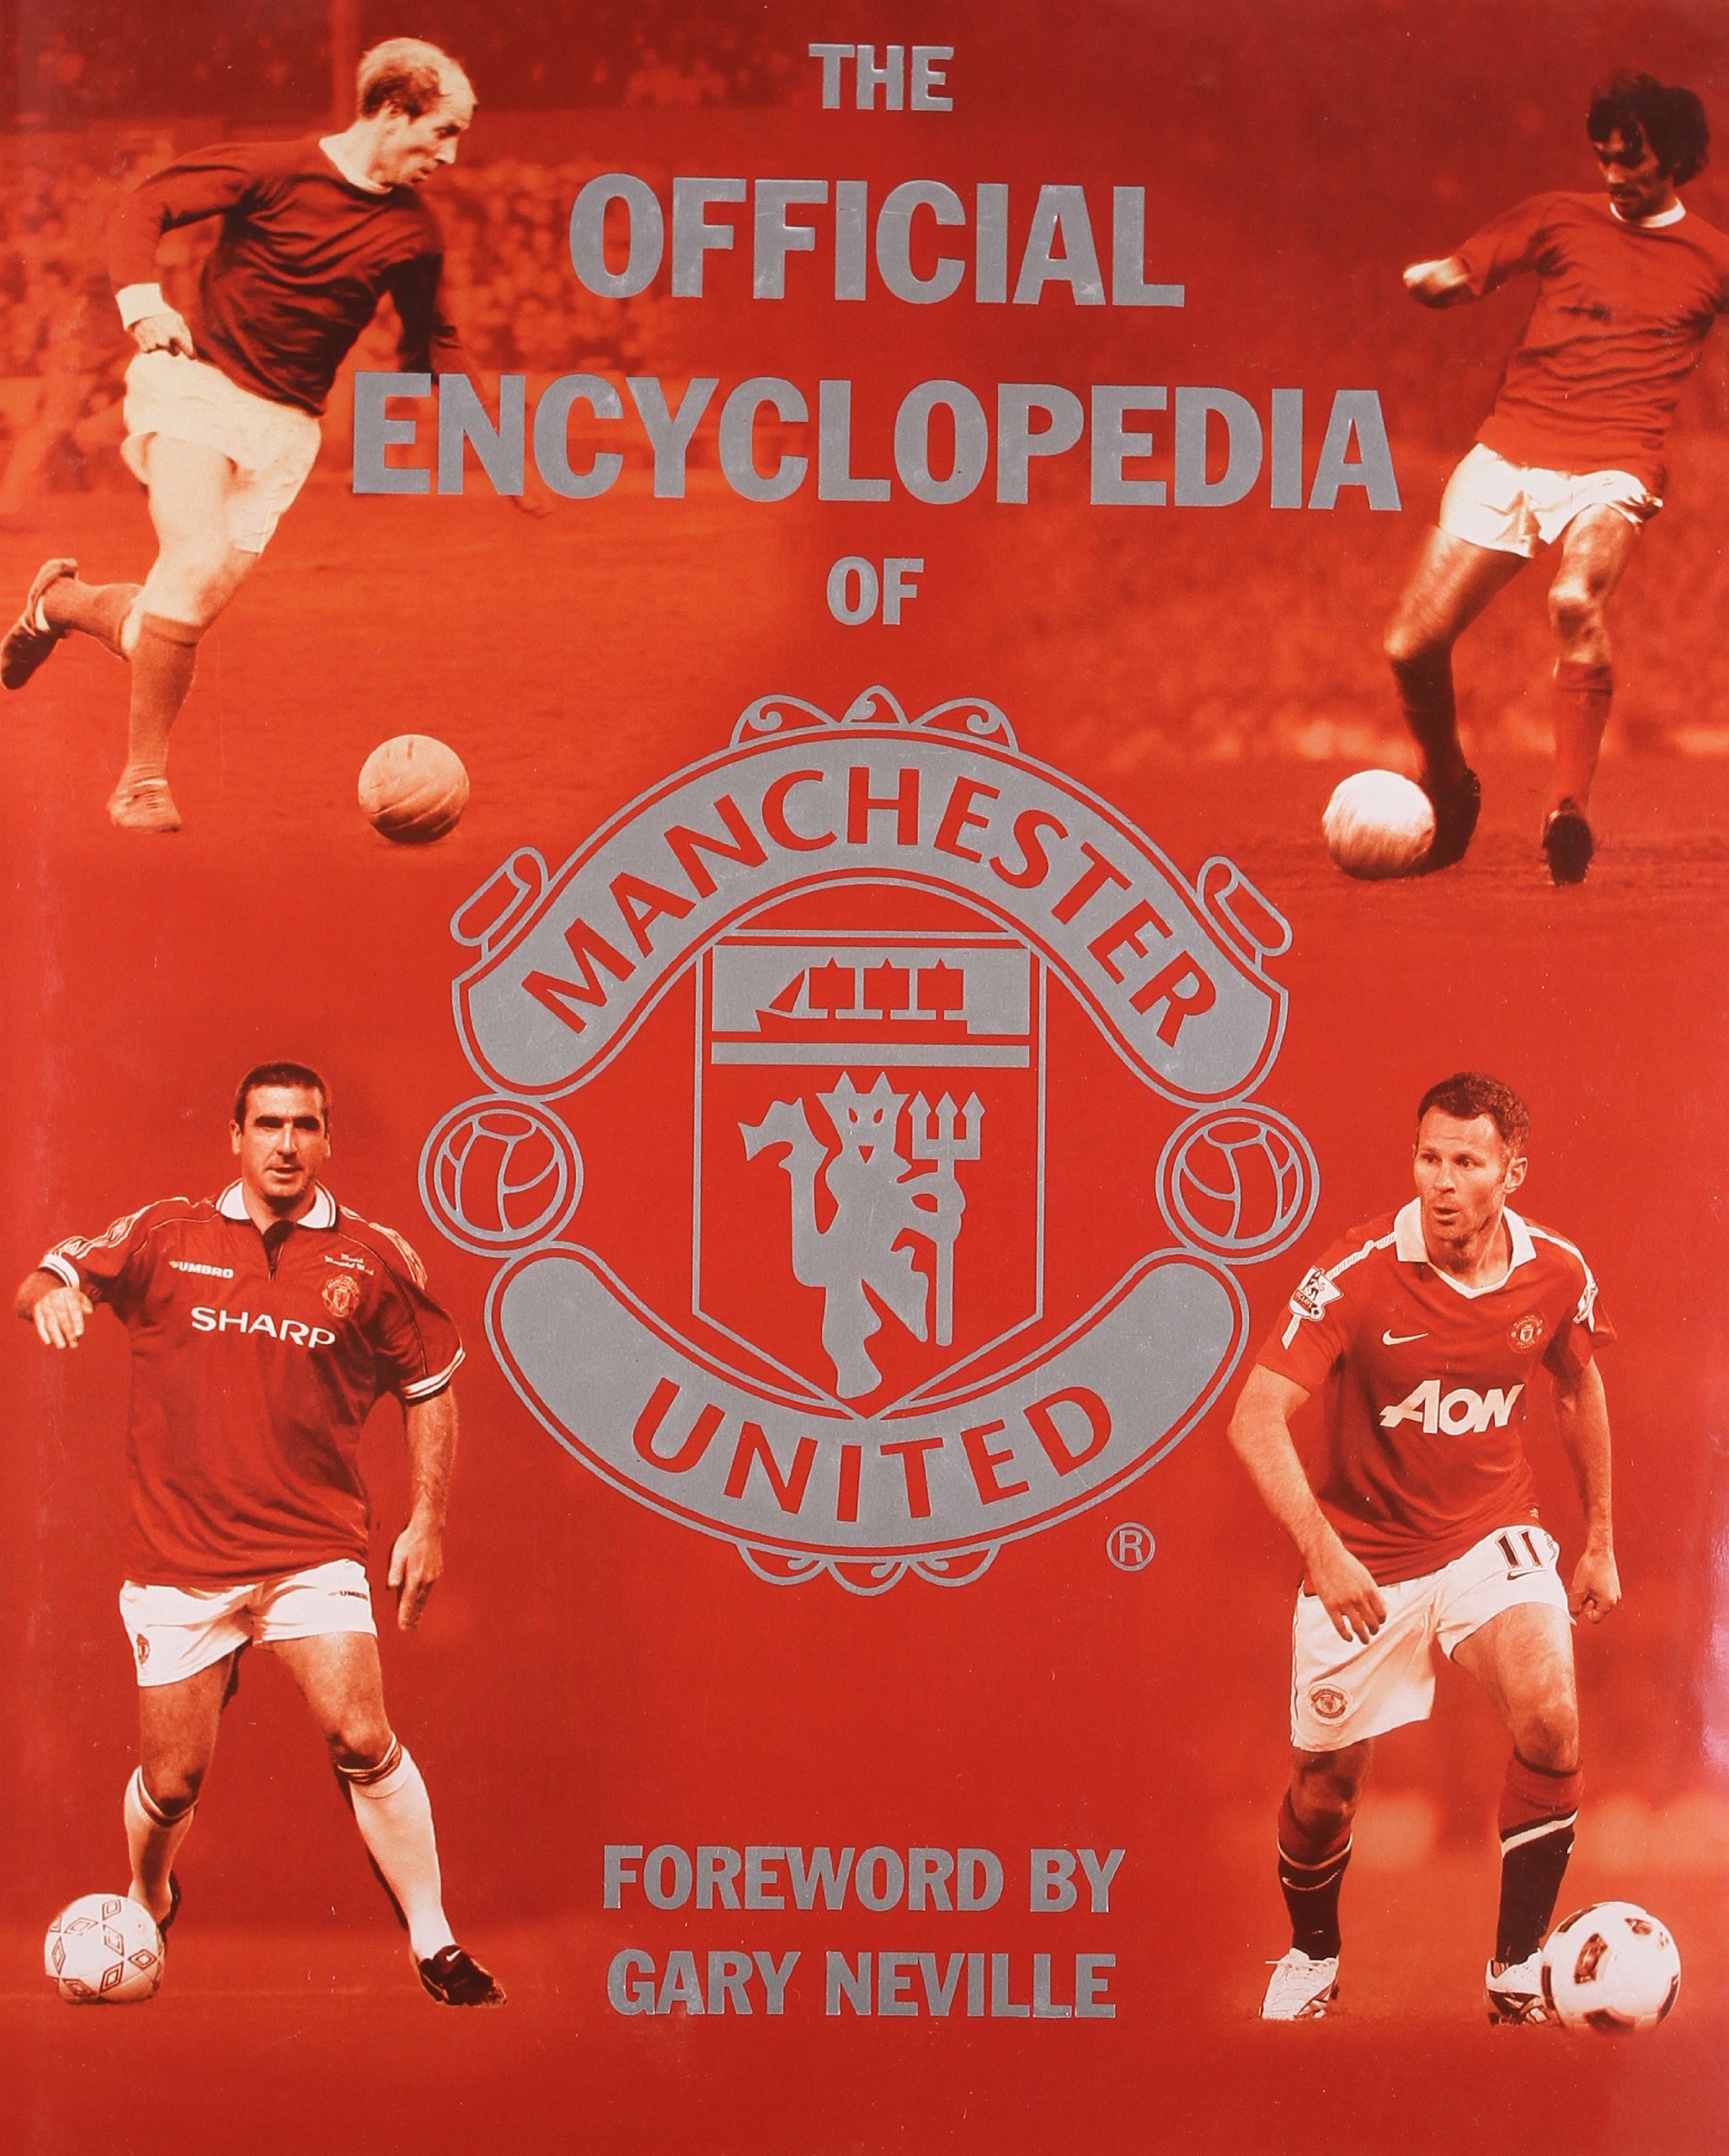 The official encyclopedia of Manchester United